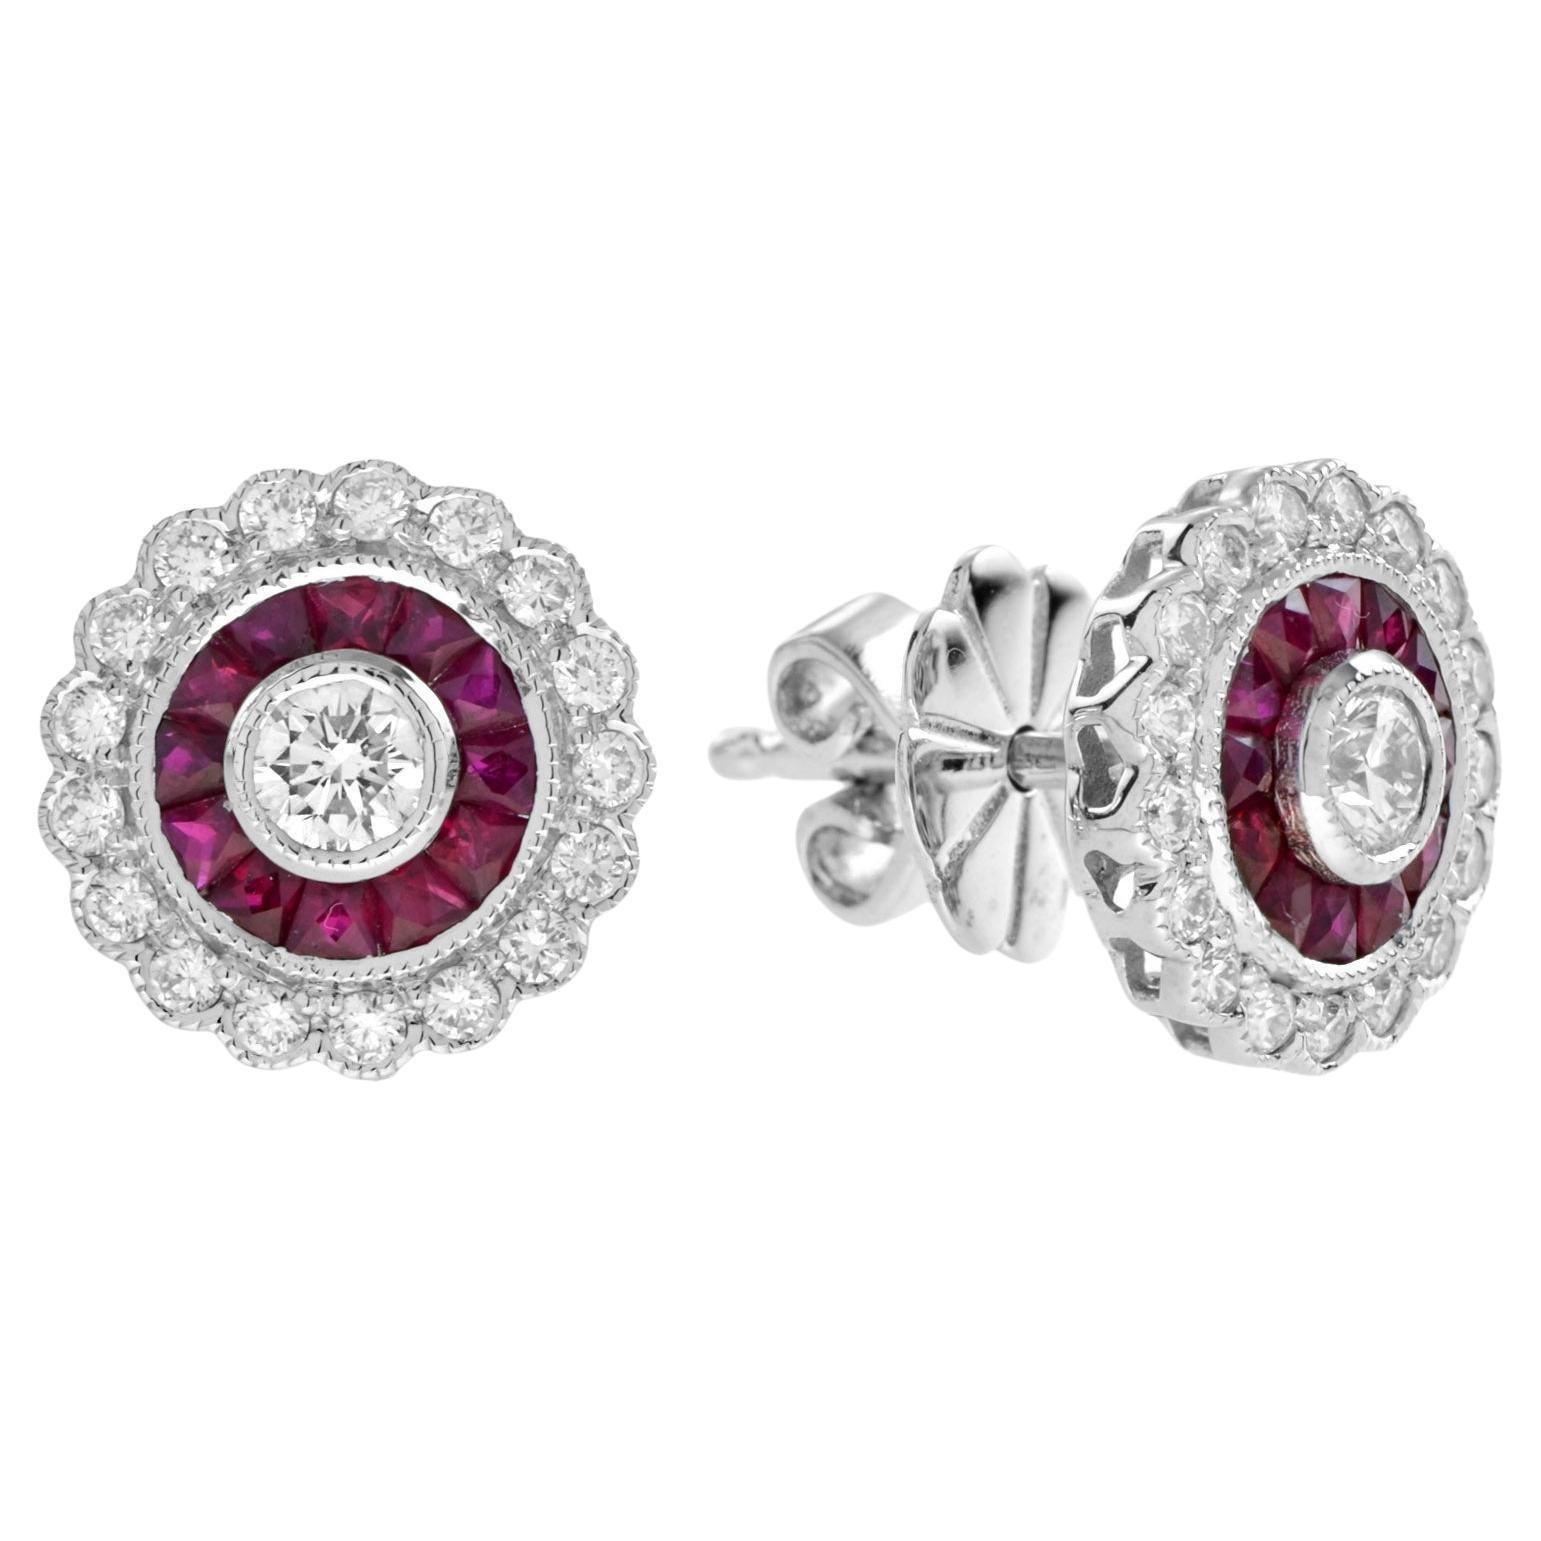 Art Deo Style Round Diamond and Ruby Stud Earrings in 18K White Gold